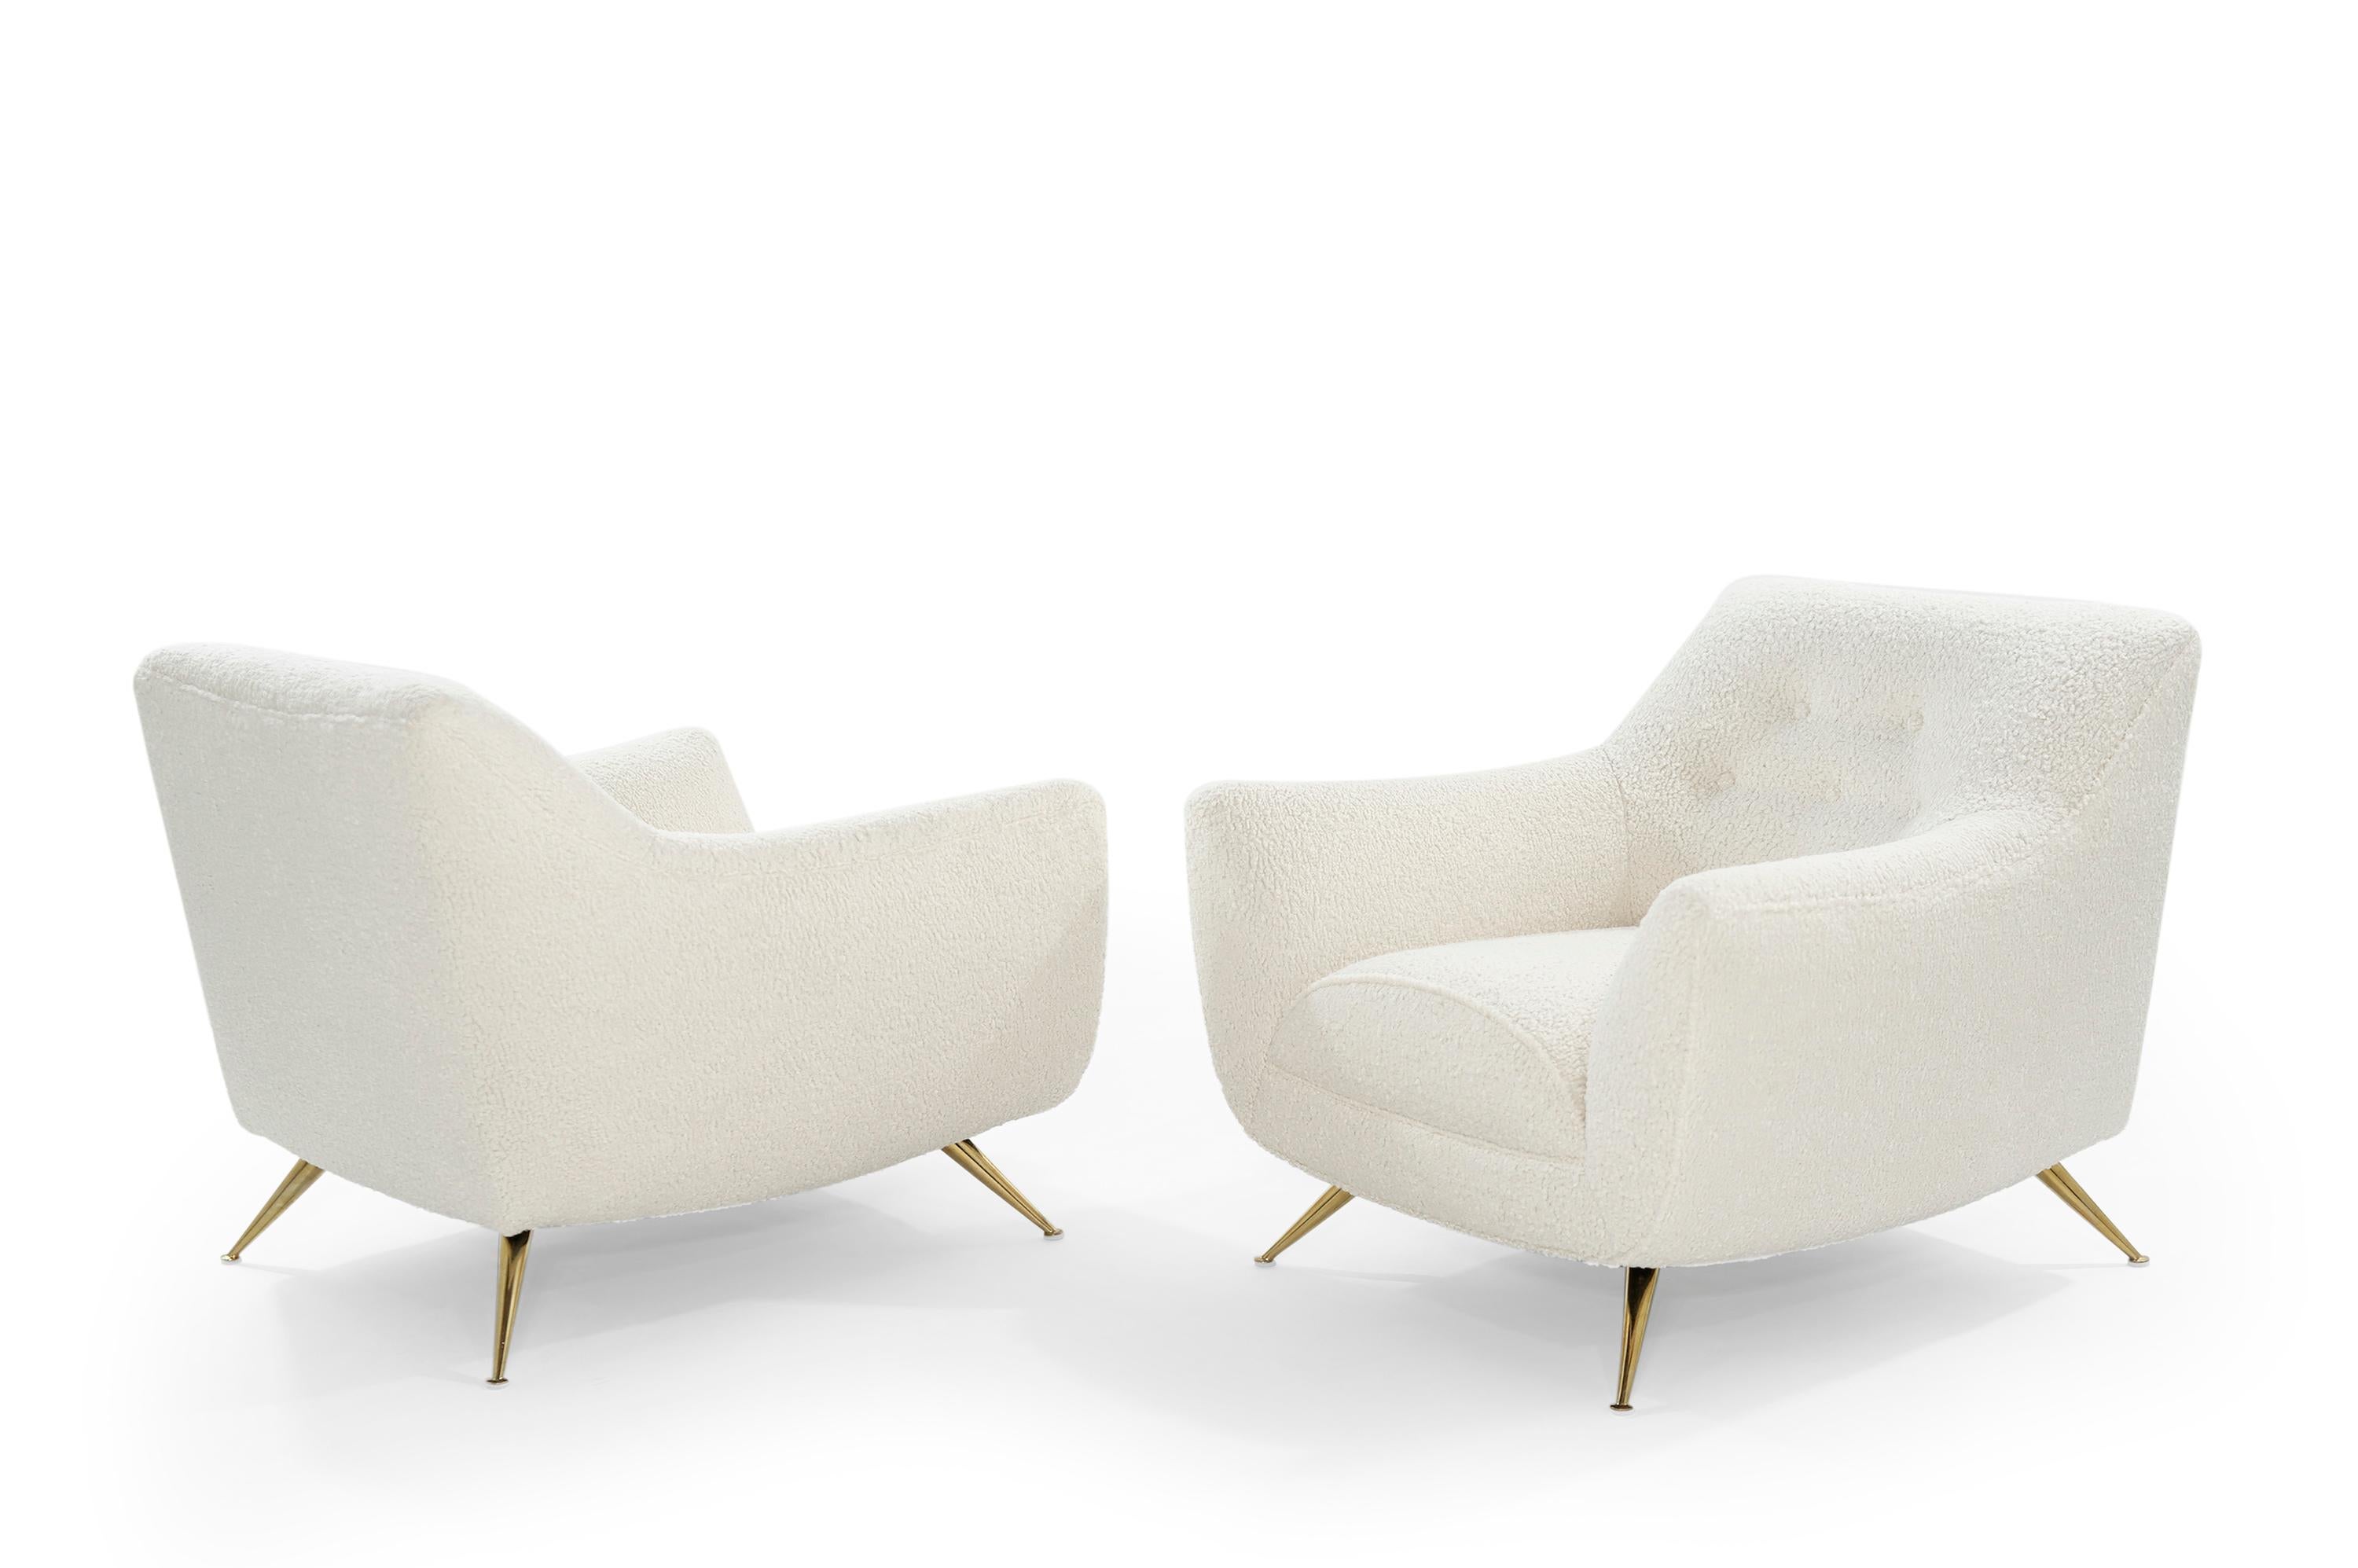 20th Century Mid-Century Modern Henry Glass Lounge Chairs in Bouclé